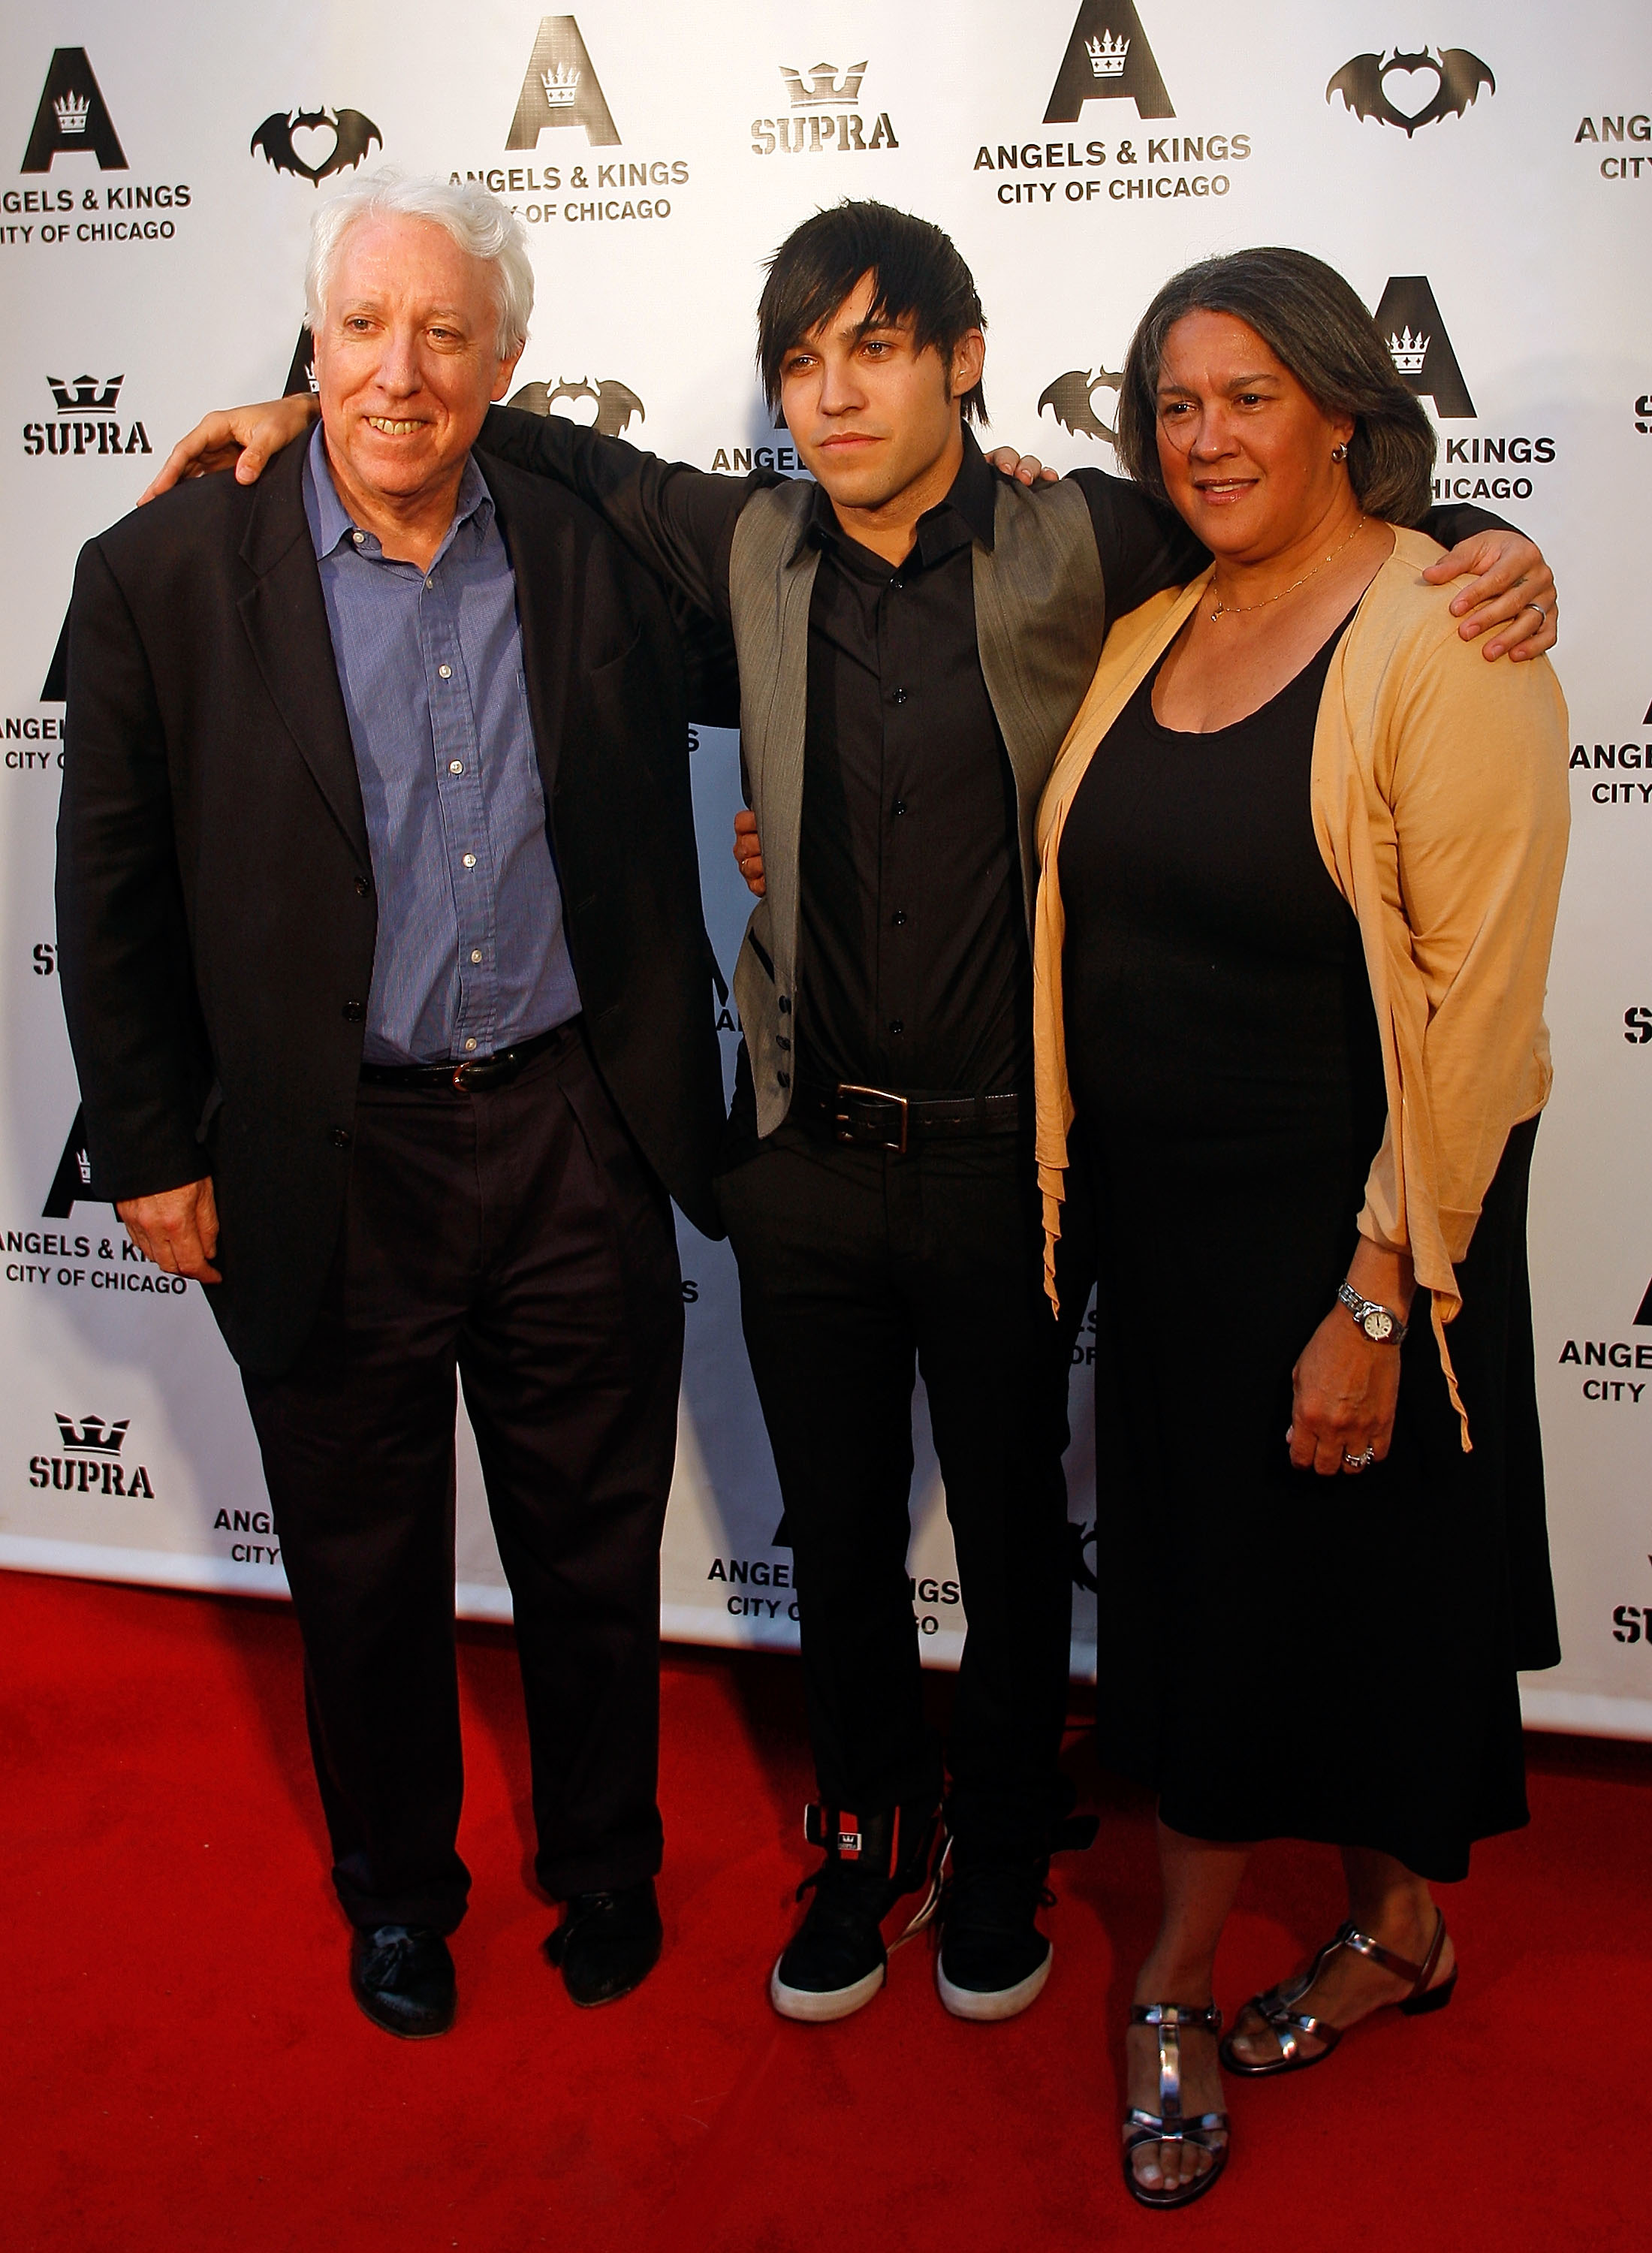 Pete Wentz with his parents Pete Wentz Sr. and Dale Wentz at Angels & Kings on June 17, 2008, in Chicago, Illinois. | Source: Getty Images